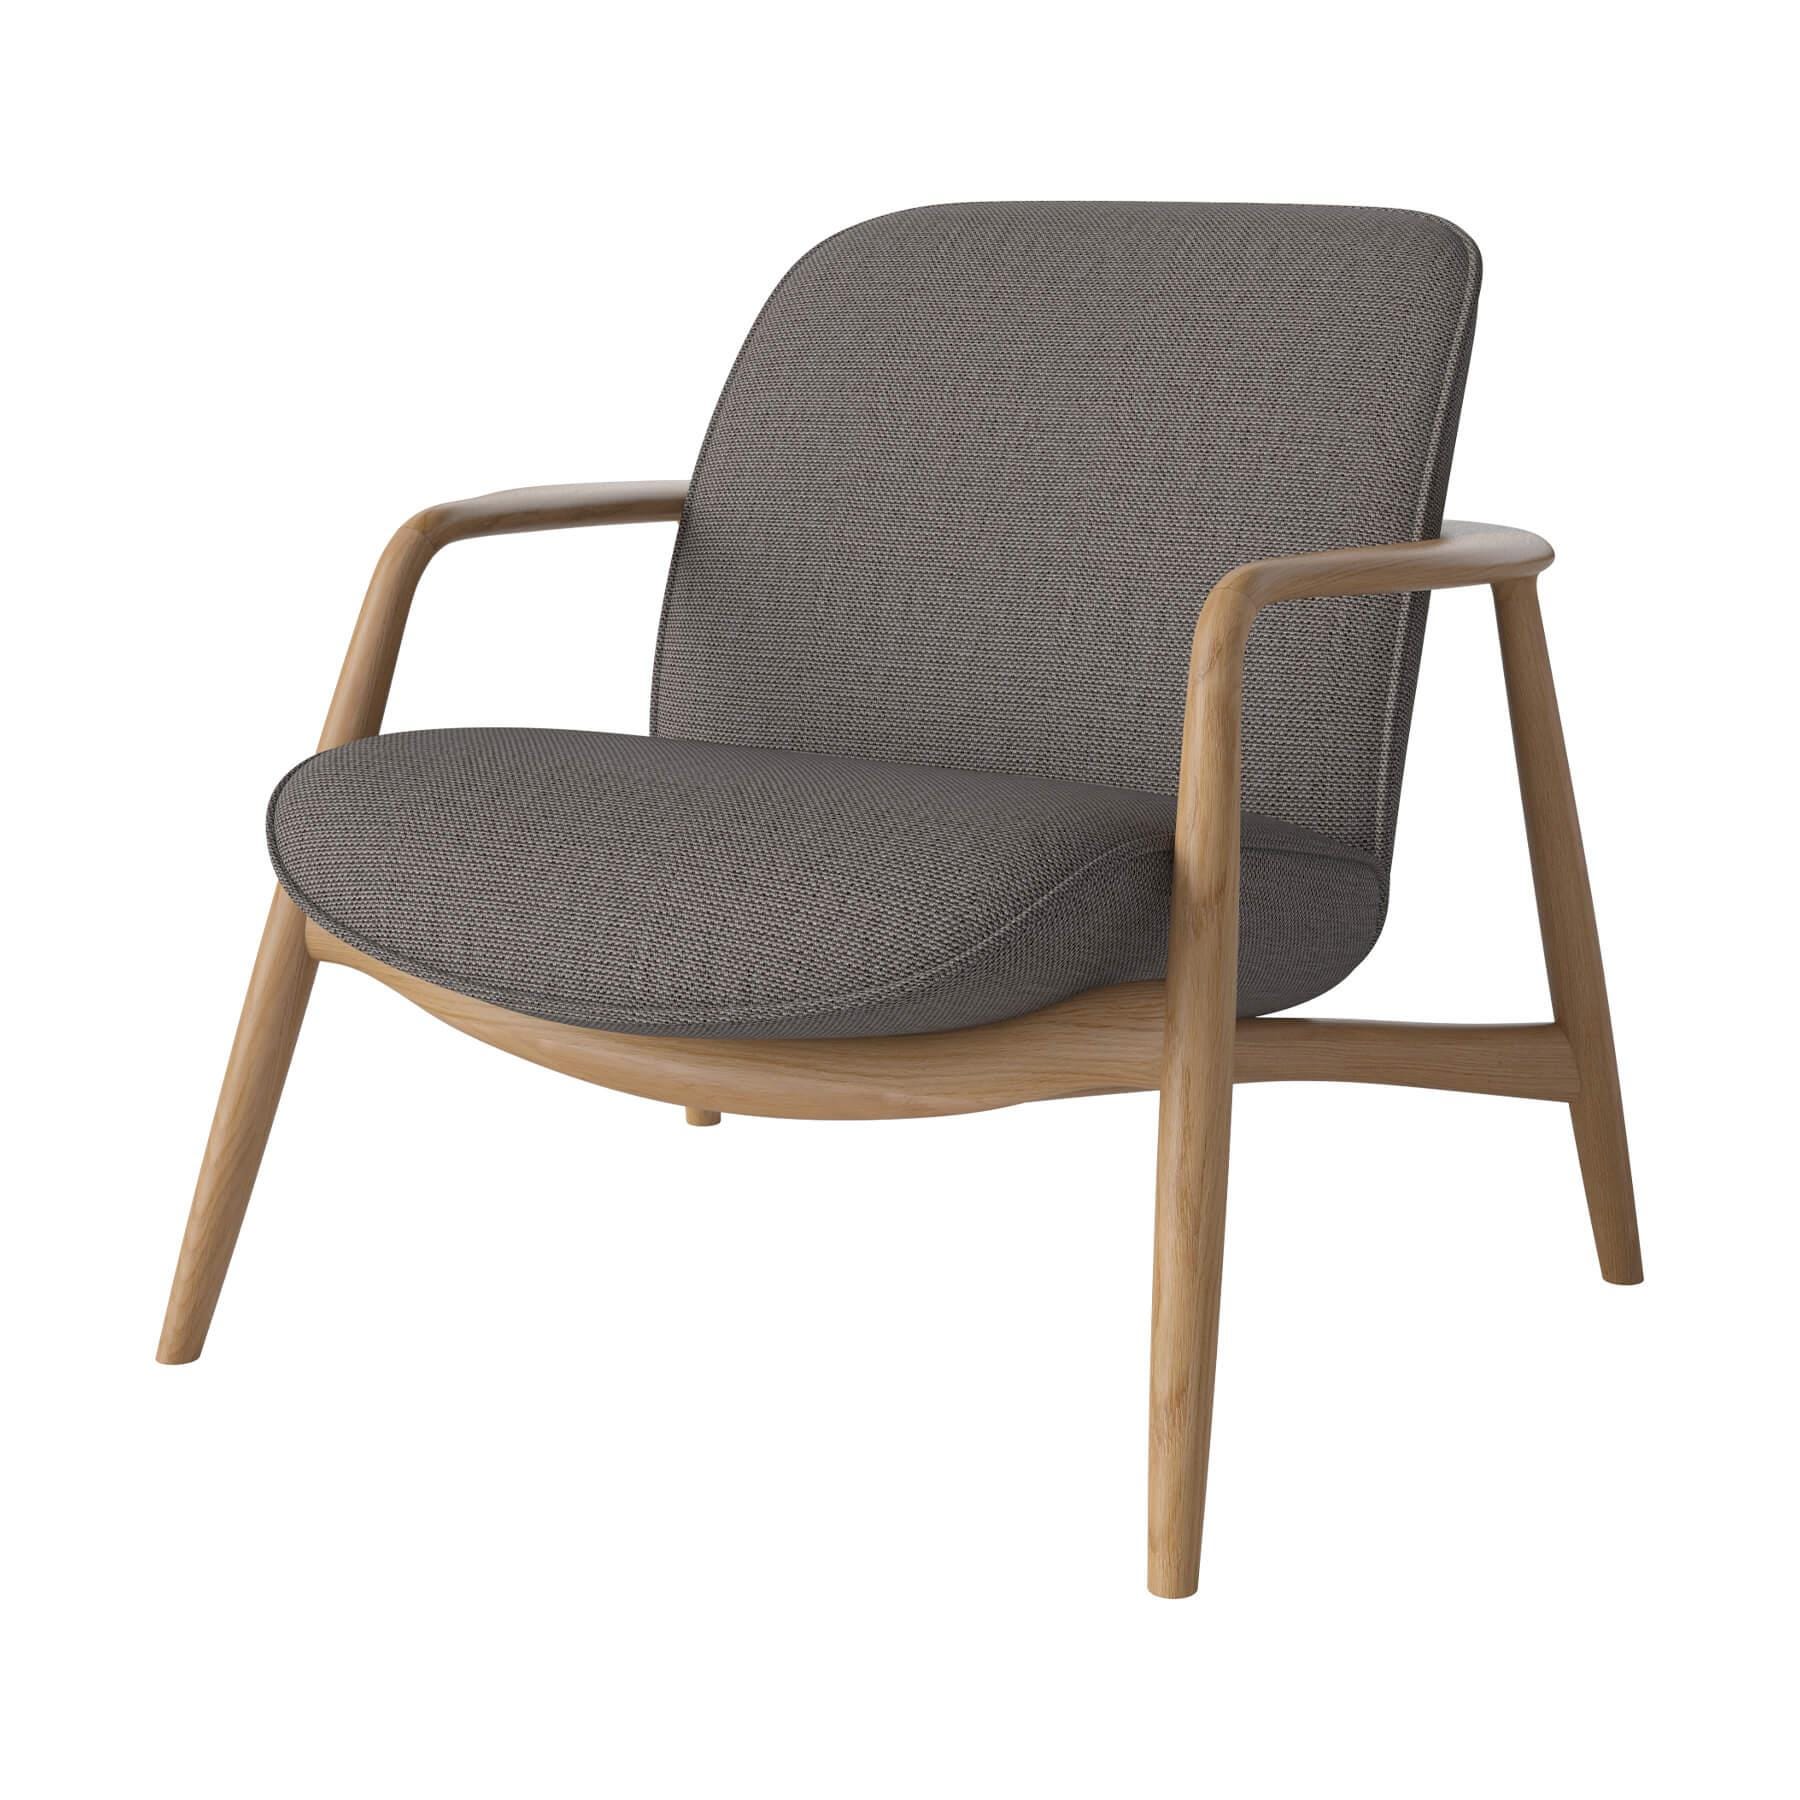 Bolia Bowie Armchair Oiled Oak London Brown Designer Furniture From Holloways Of Ludlow